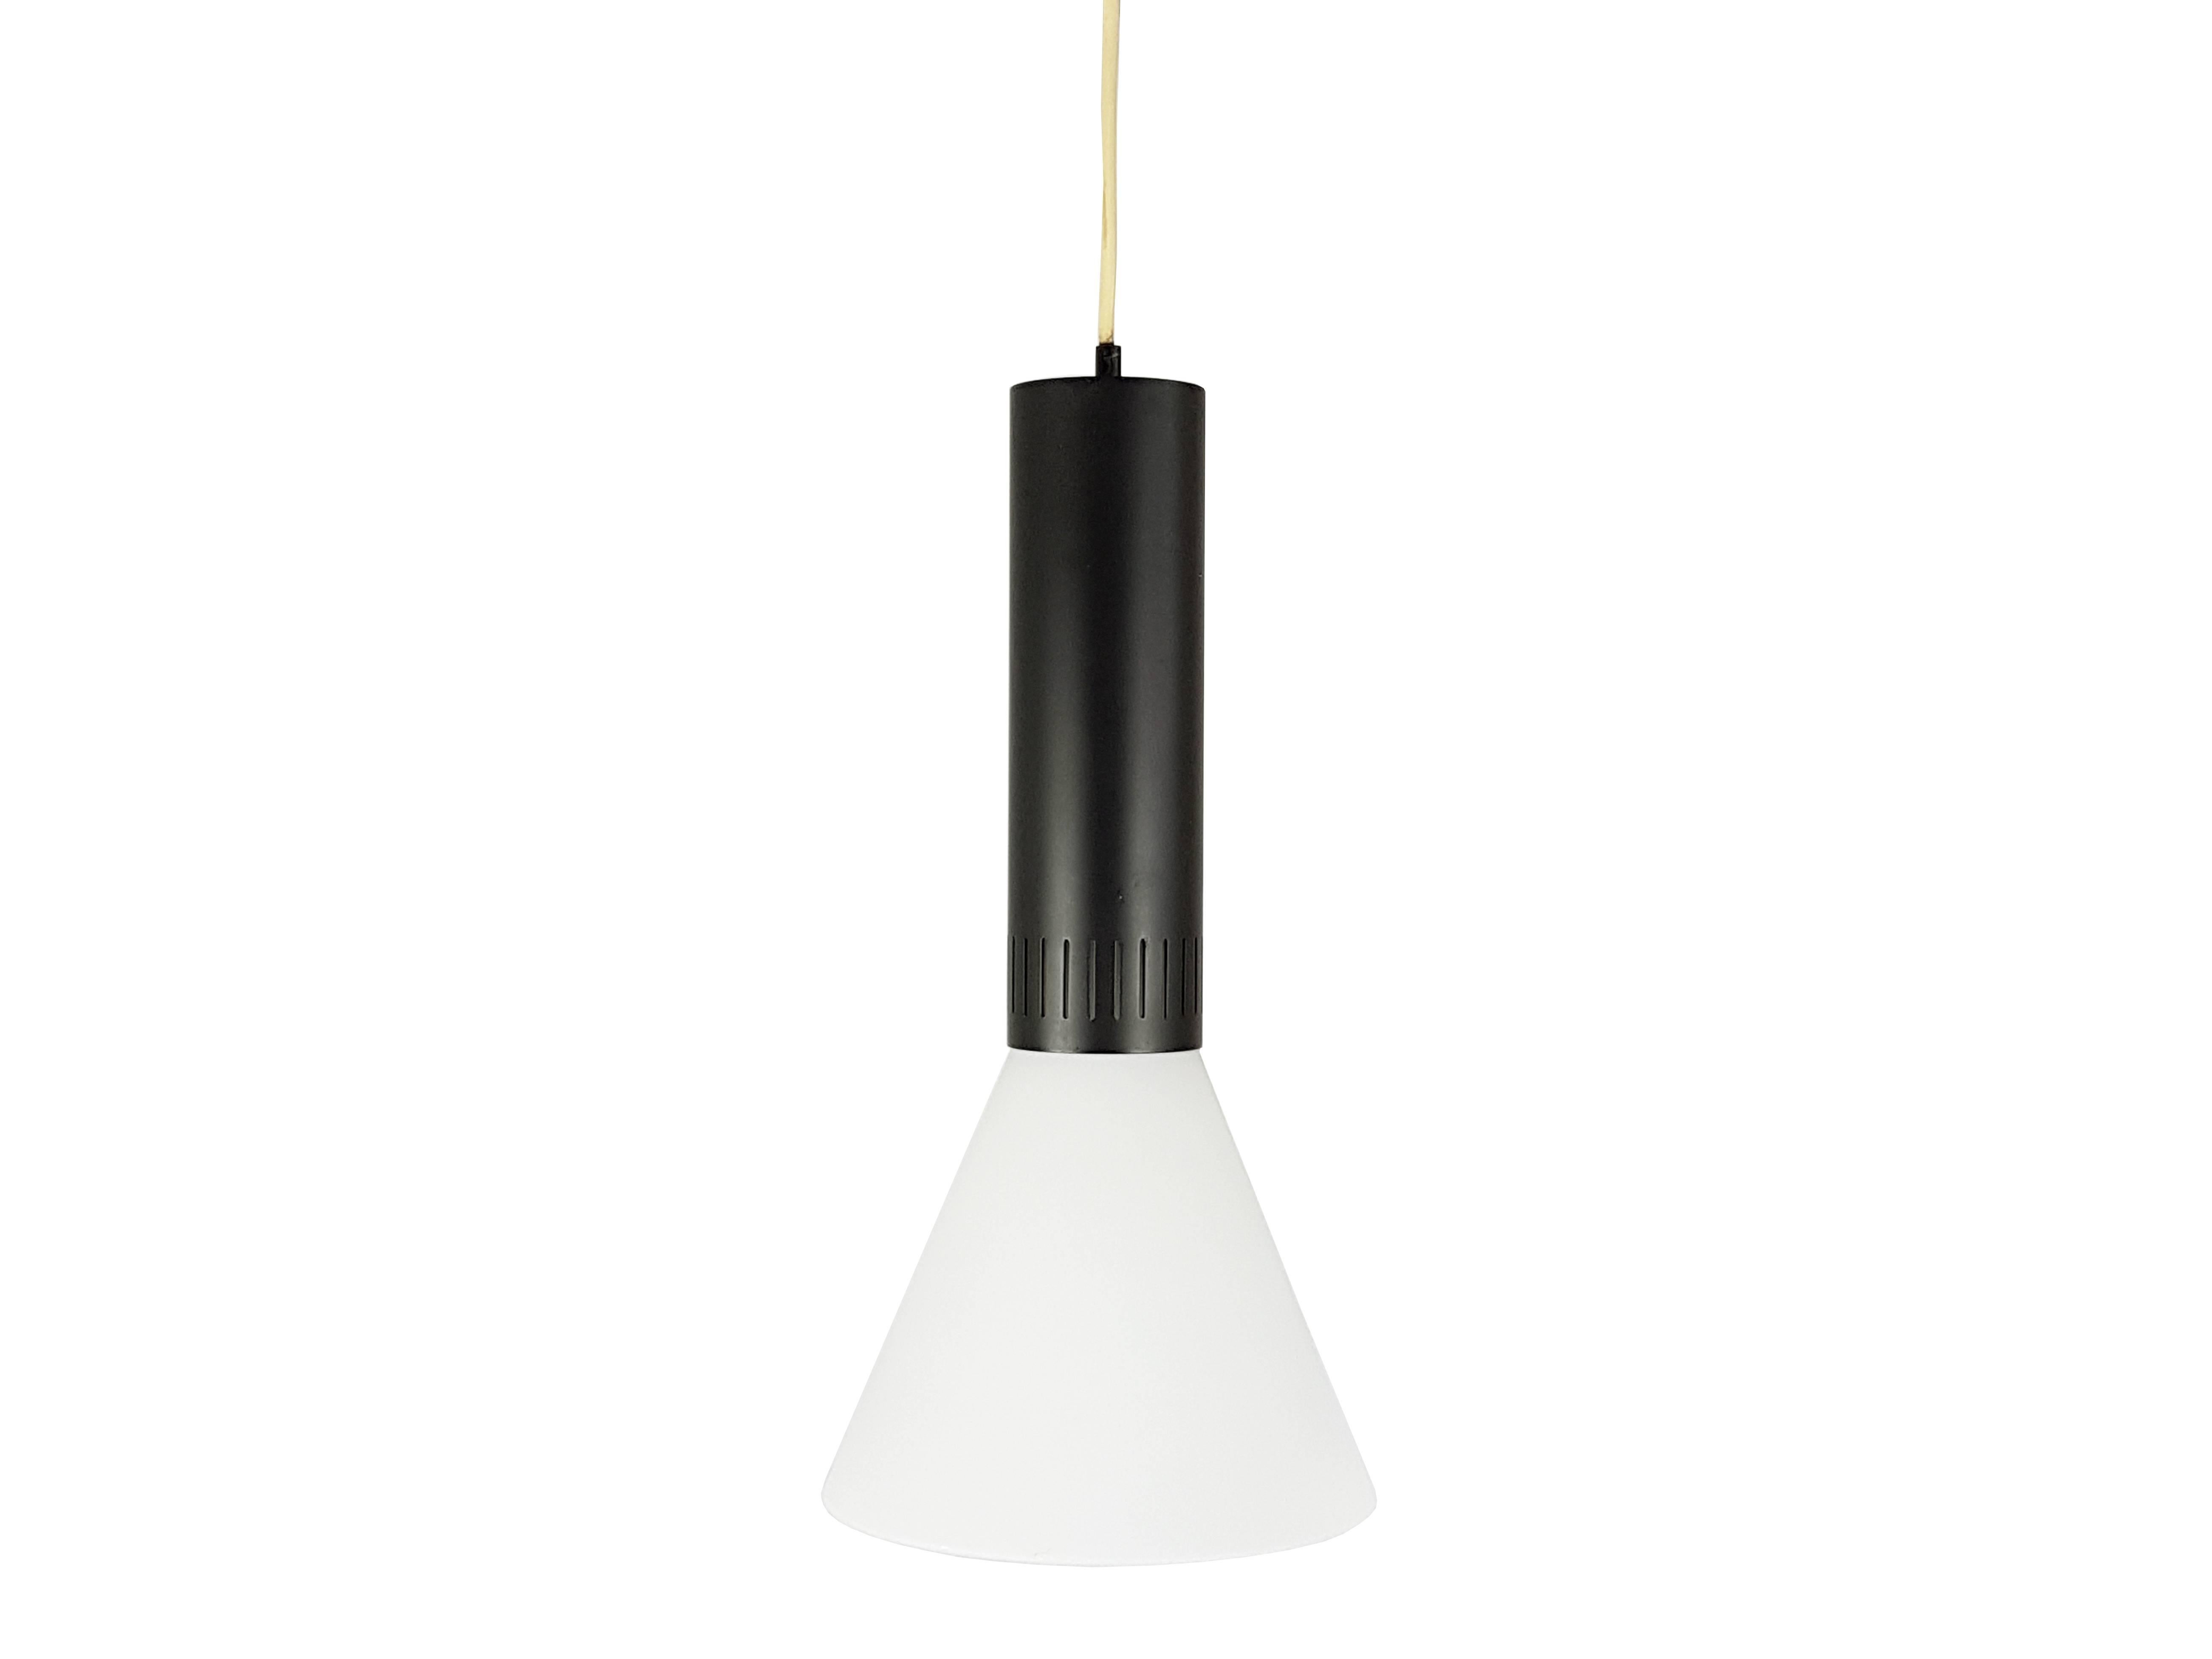 This pendant lamp model 1135 was designed and produced in Italy by Stilnovo the late 1950s. It is made from a cylindrical black lacquered metal shade holder, and a shaped white opaline glass shade. The lamp is completely original and remains in very